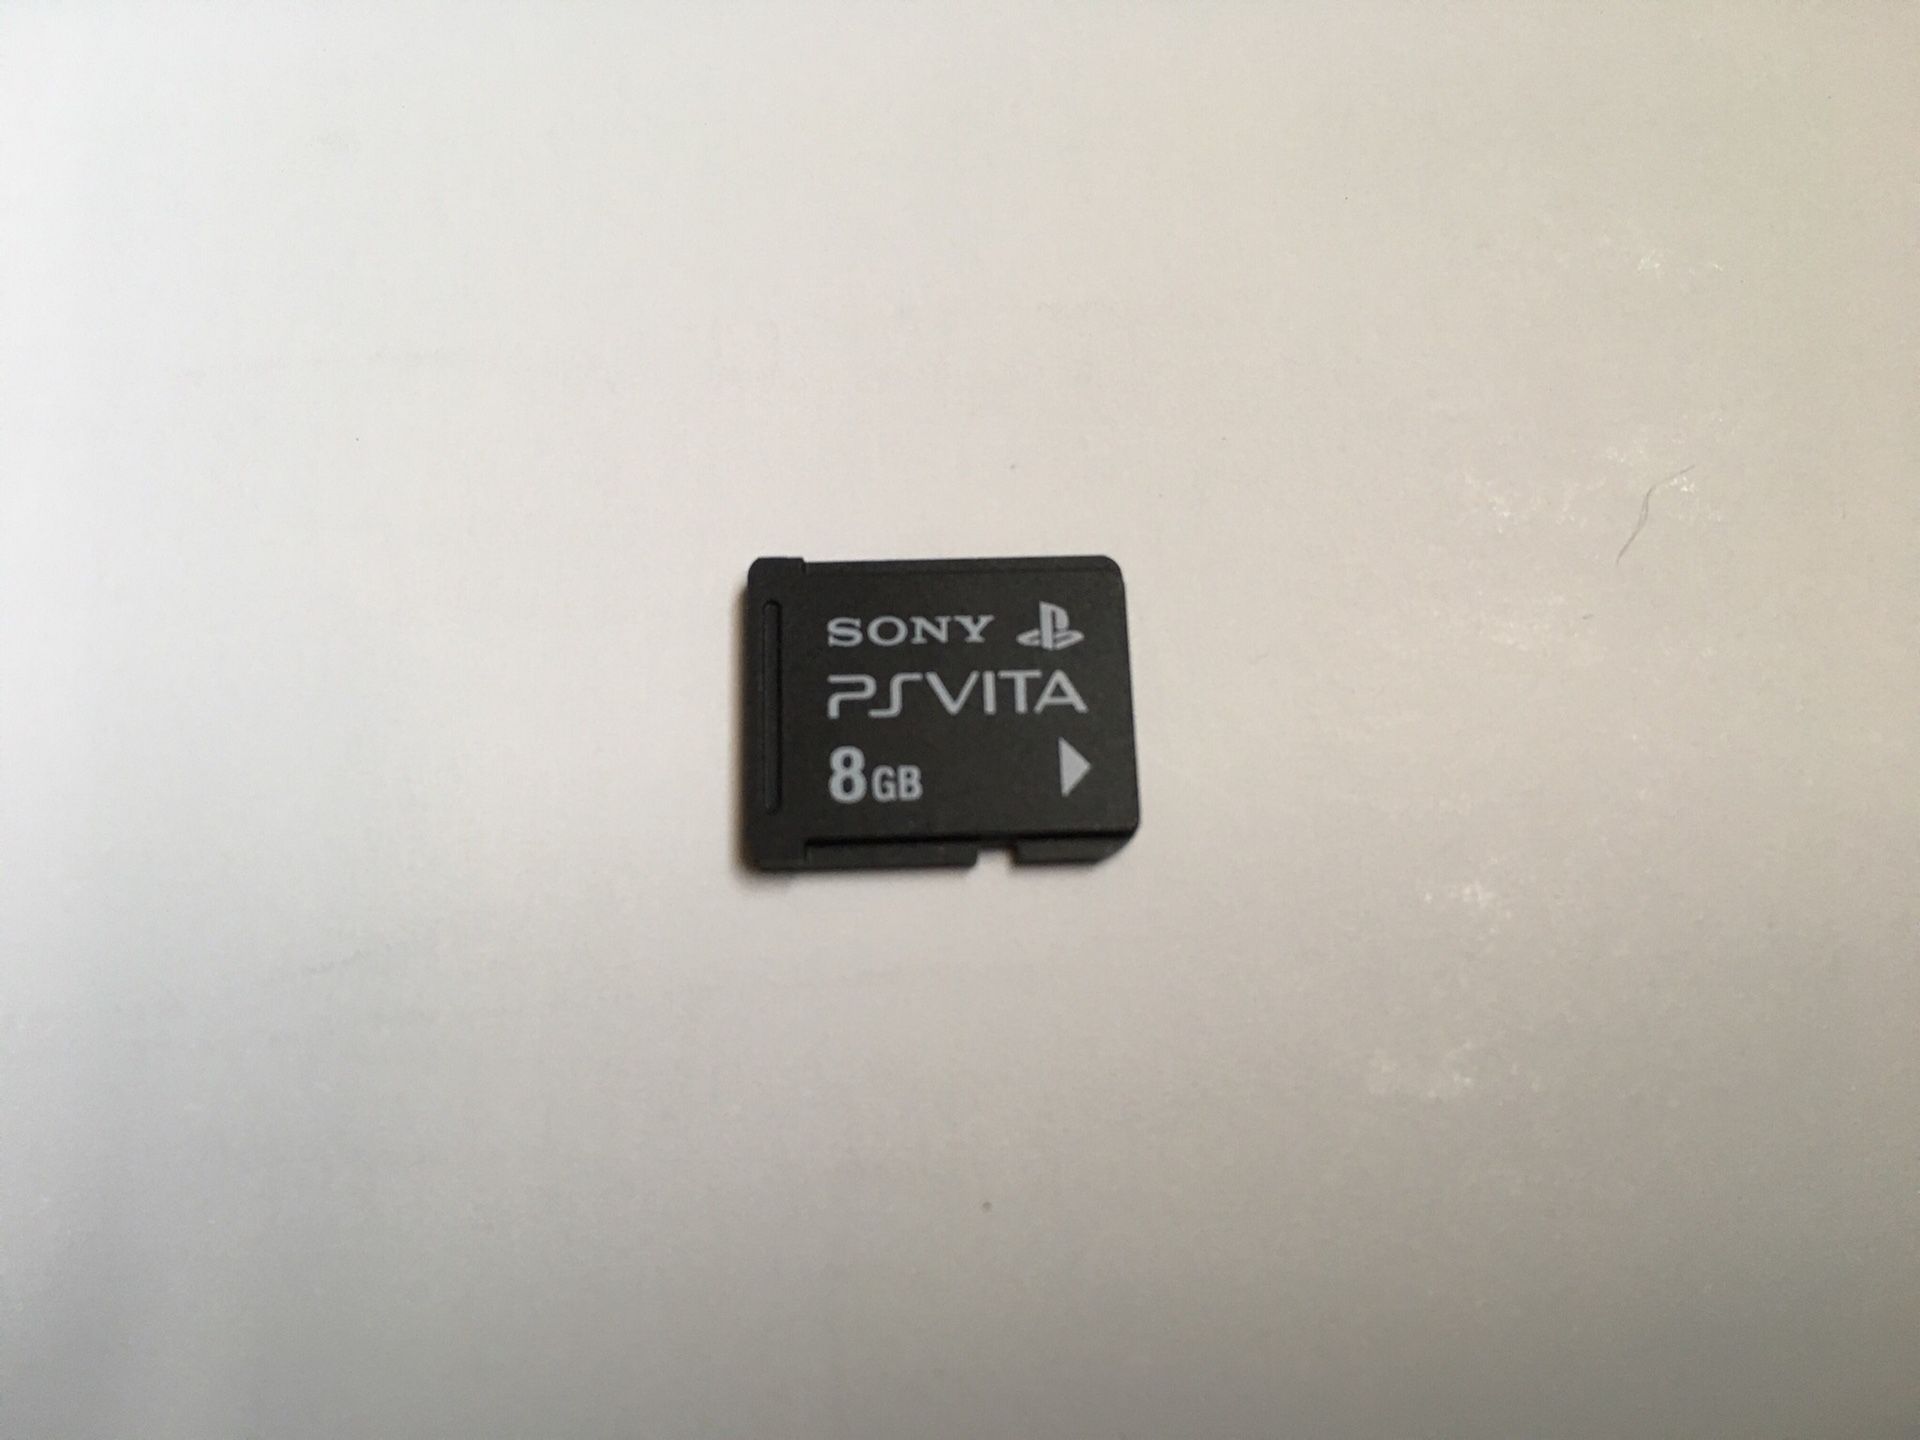 8GB Memory Stick for PlayStation/PS/Vita @VGs!